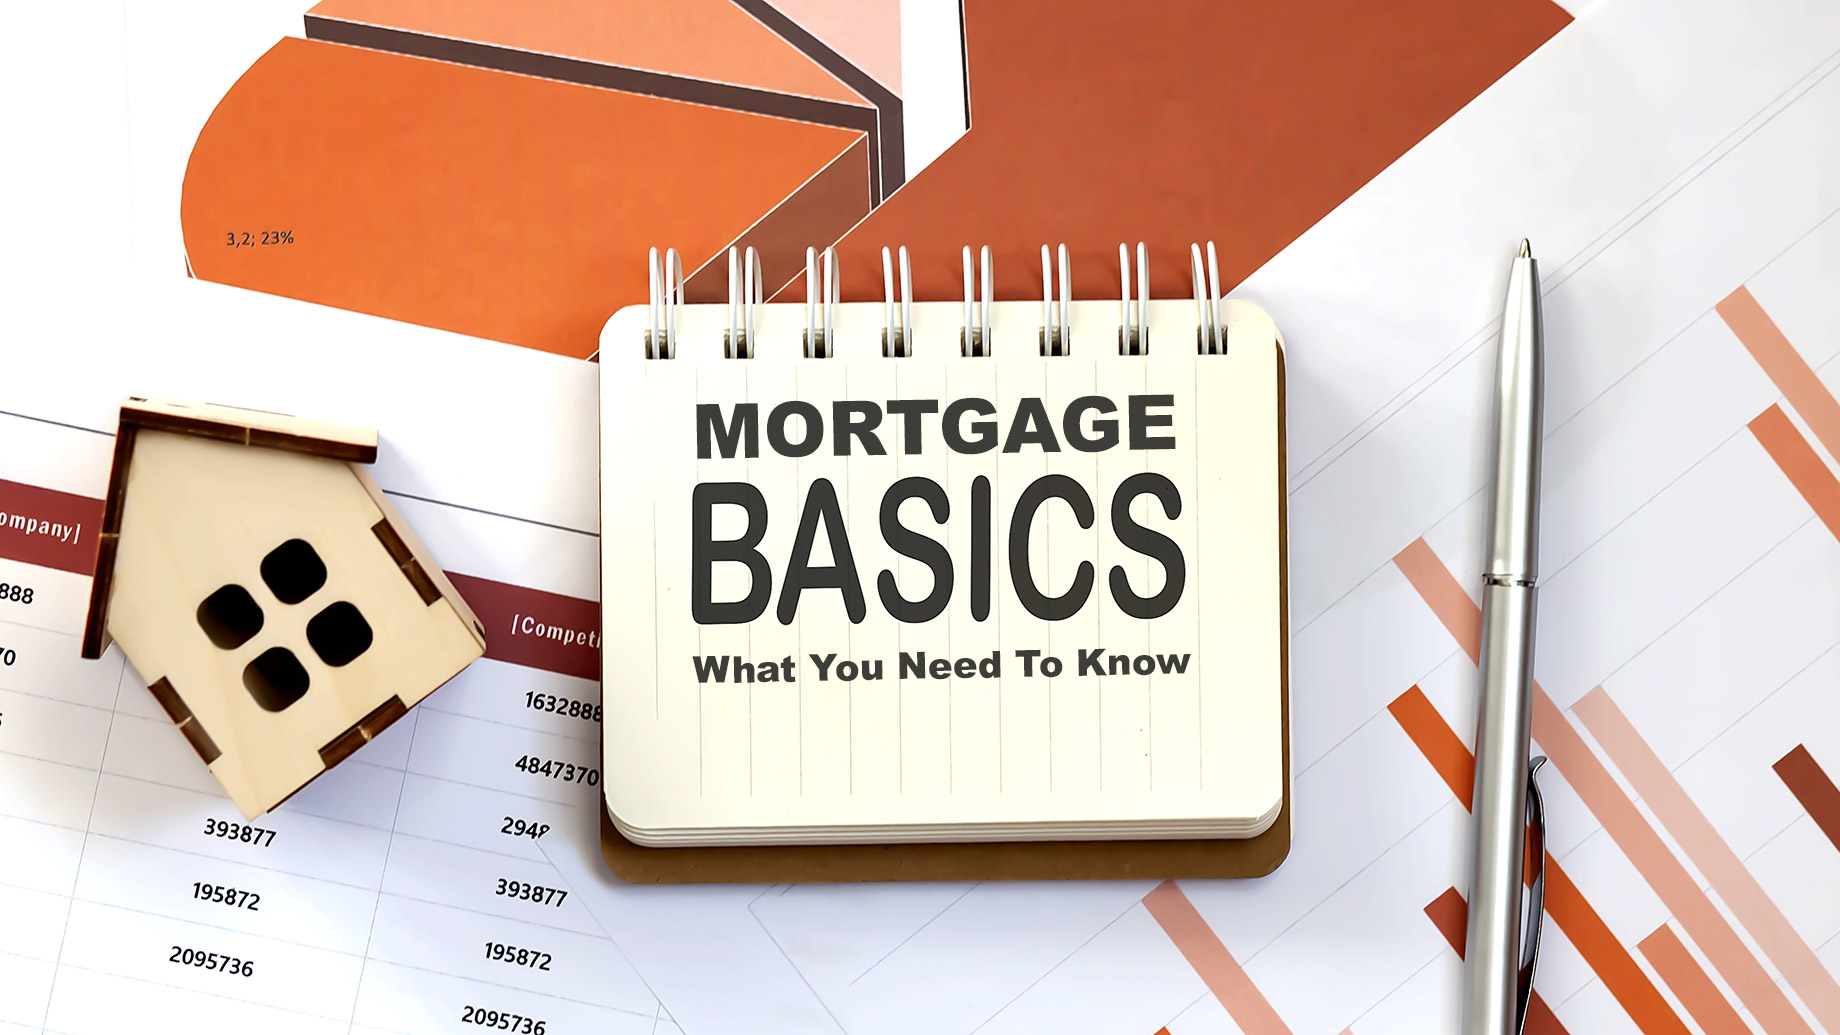 Mortgage Basics - What You Need To Know